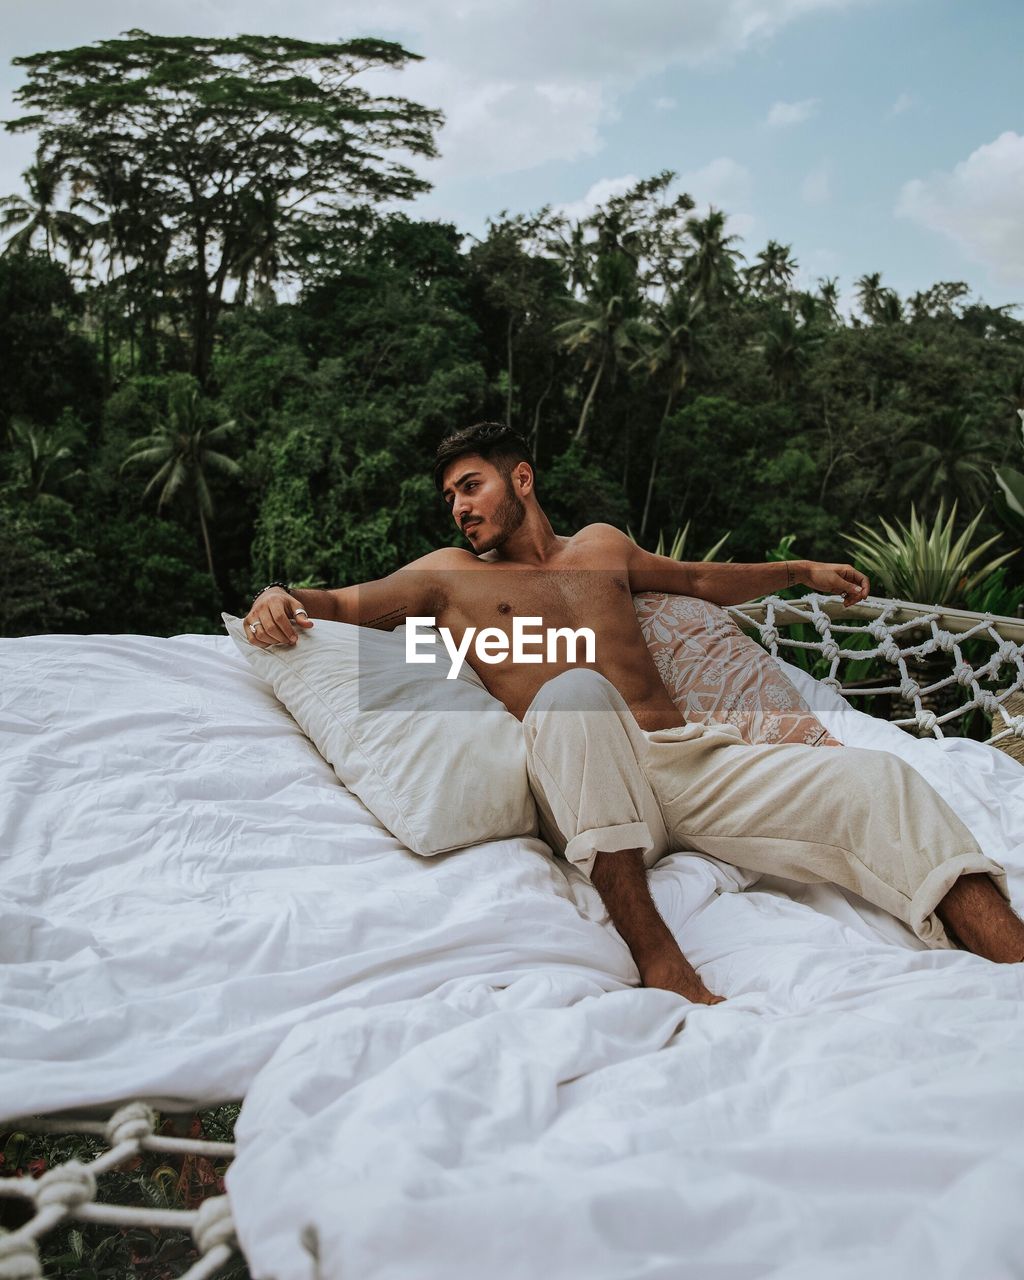 Shirtless young man relaxing on bed against trees in forest